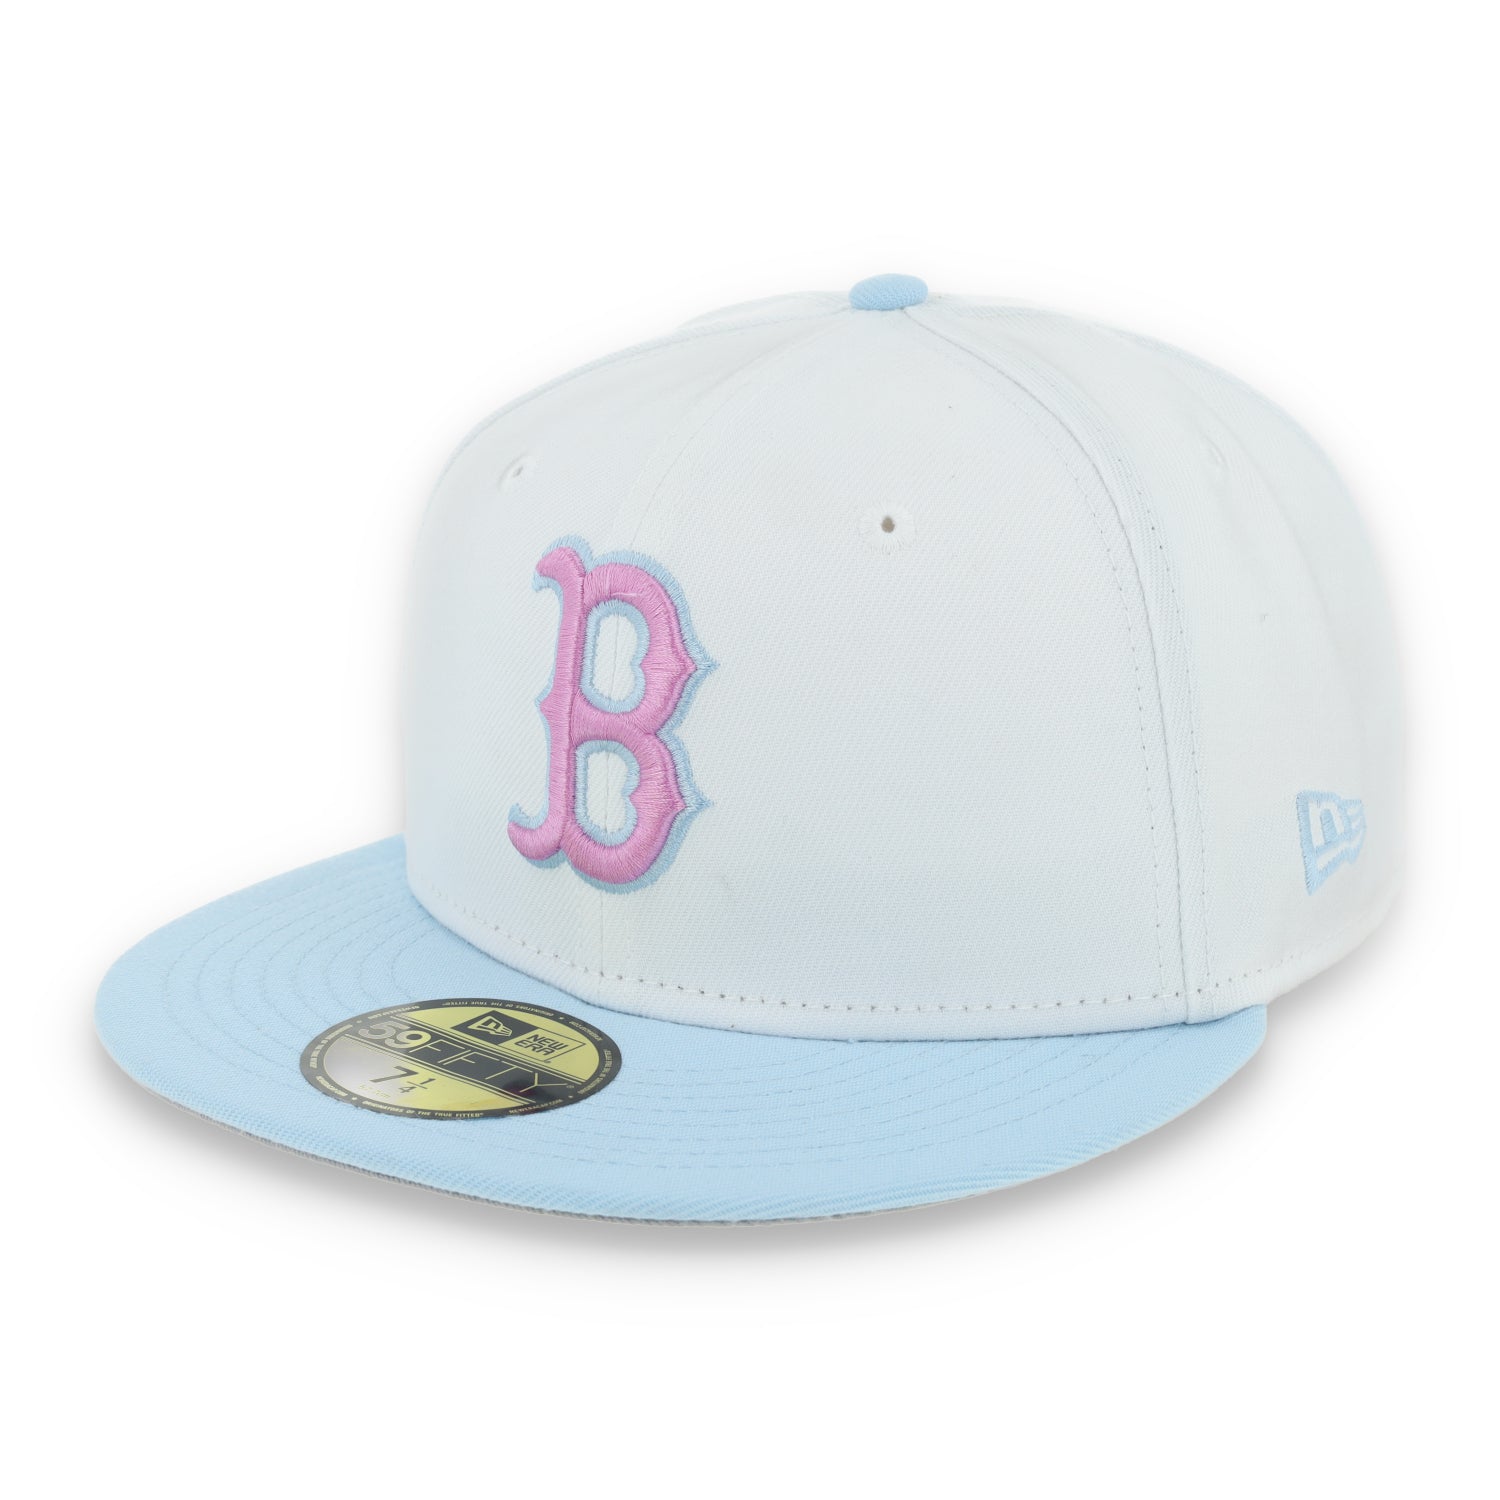 New Era Boston Red Sox Color Pack 59FIFTY Fitted Hat-White/Light Blue /Pink